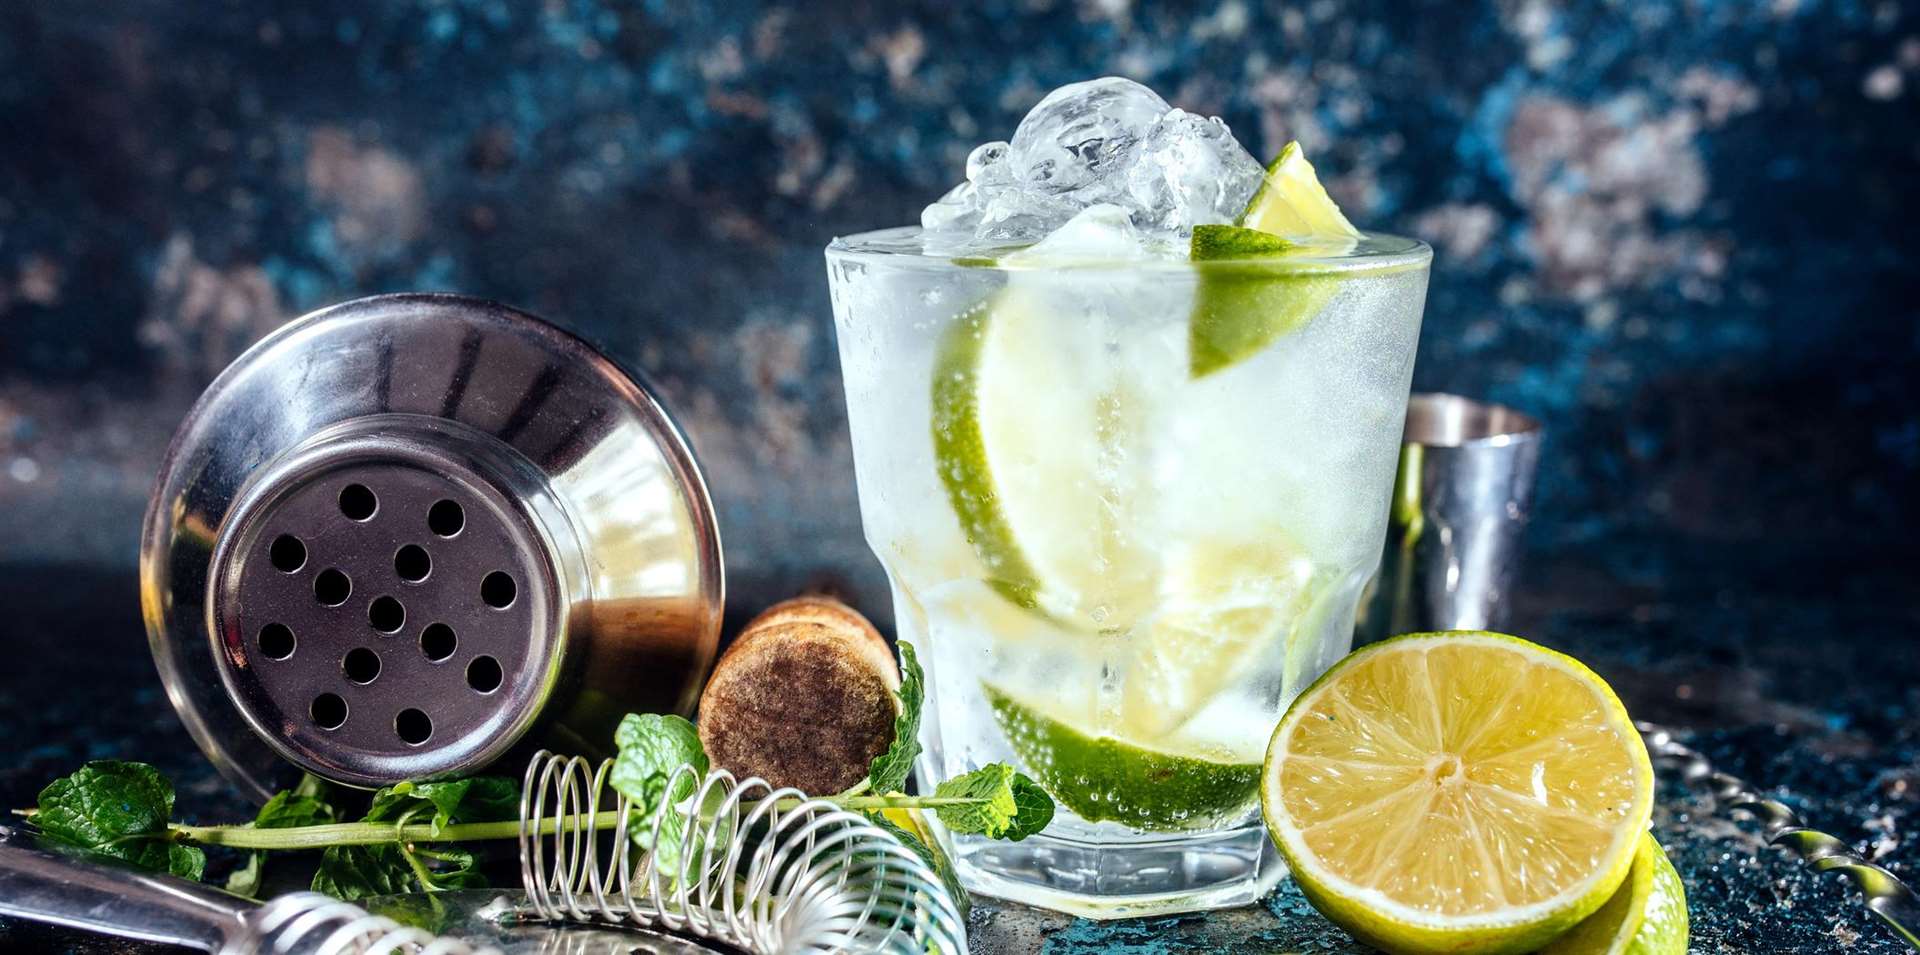 A gin tonic alcoholic cocktail with ice and mint. A taste of summer!